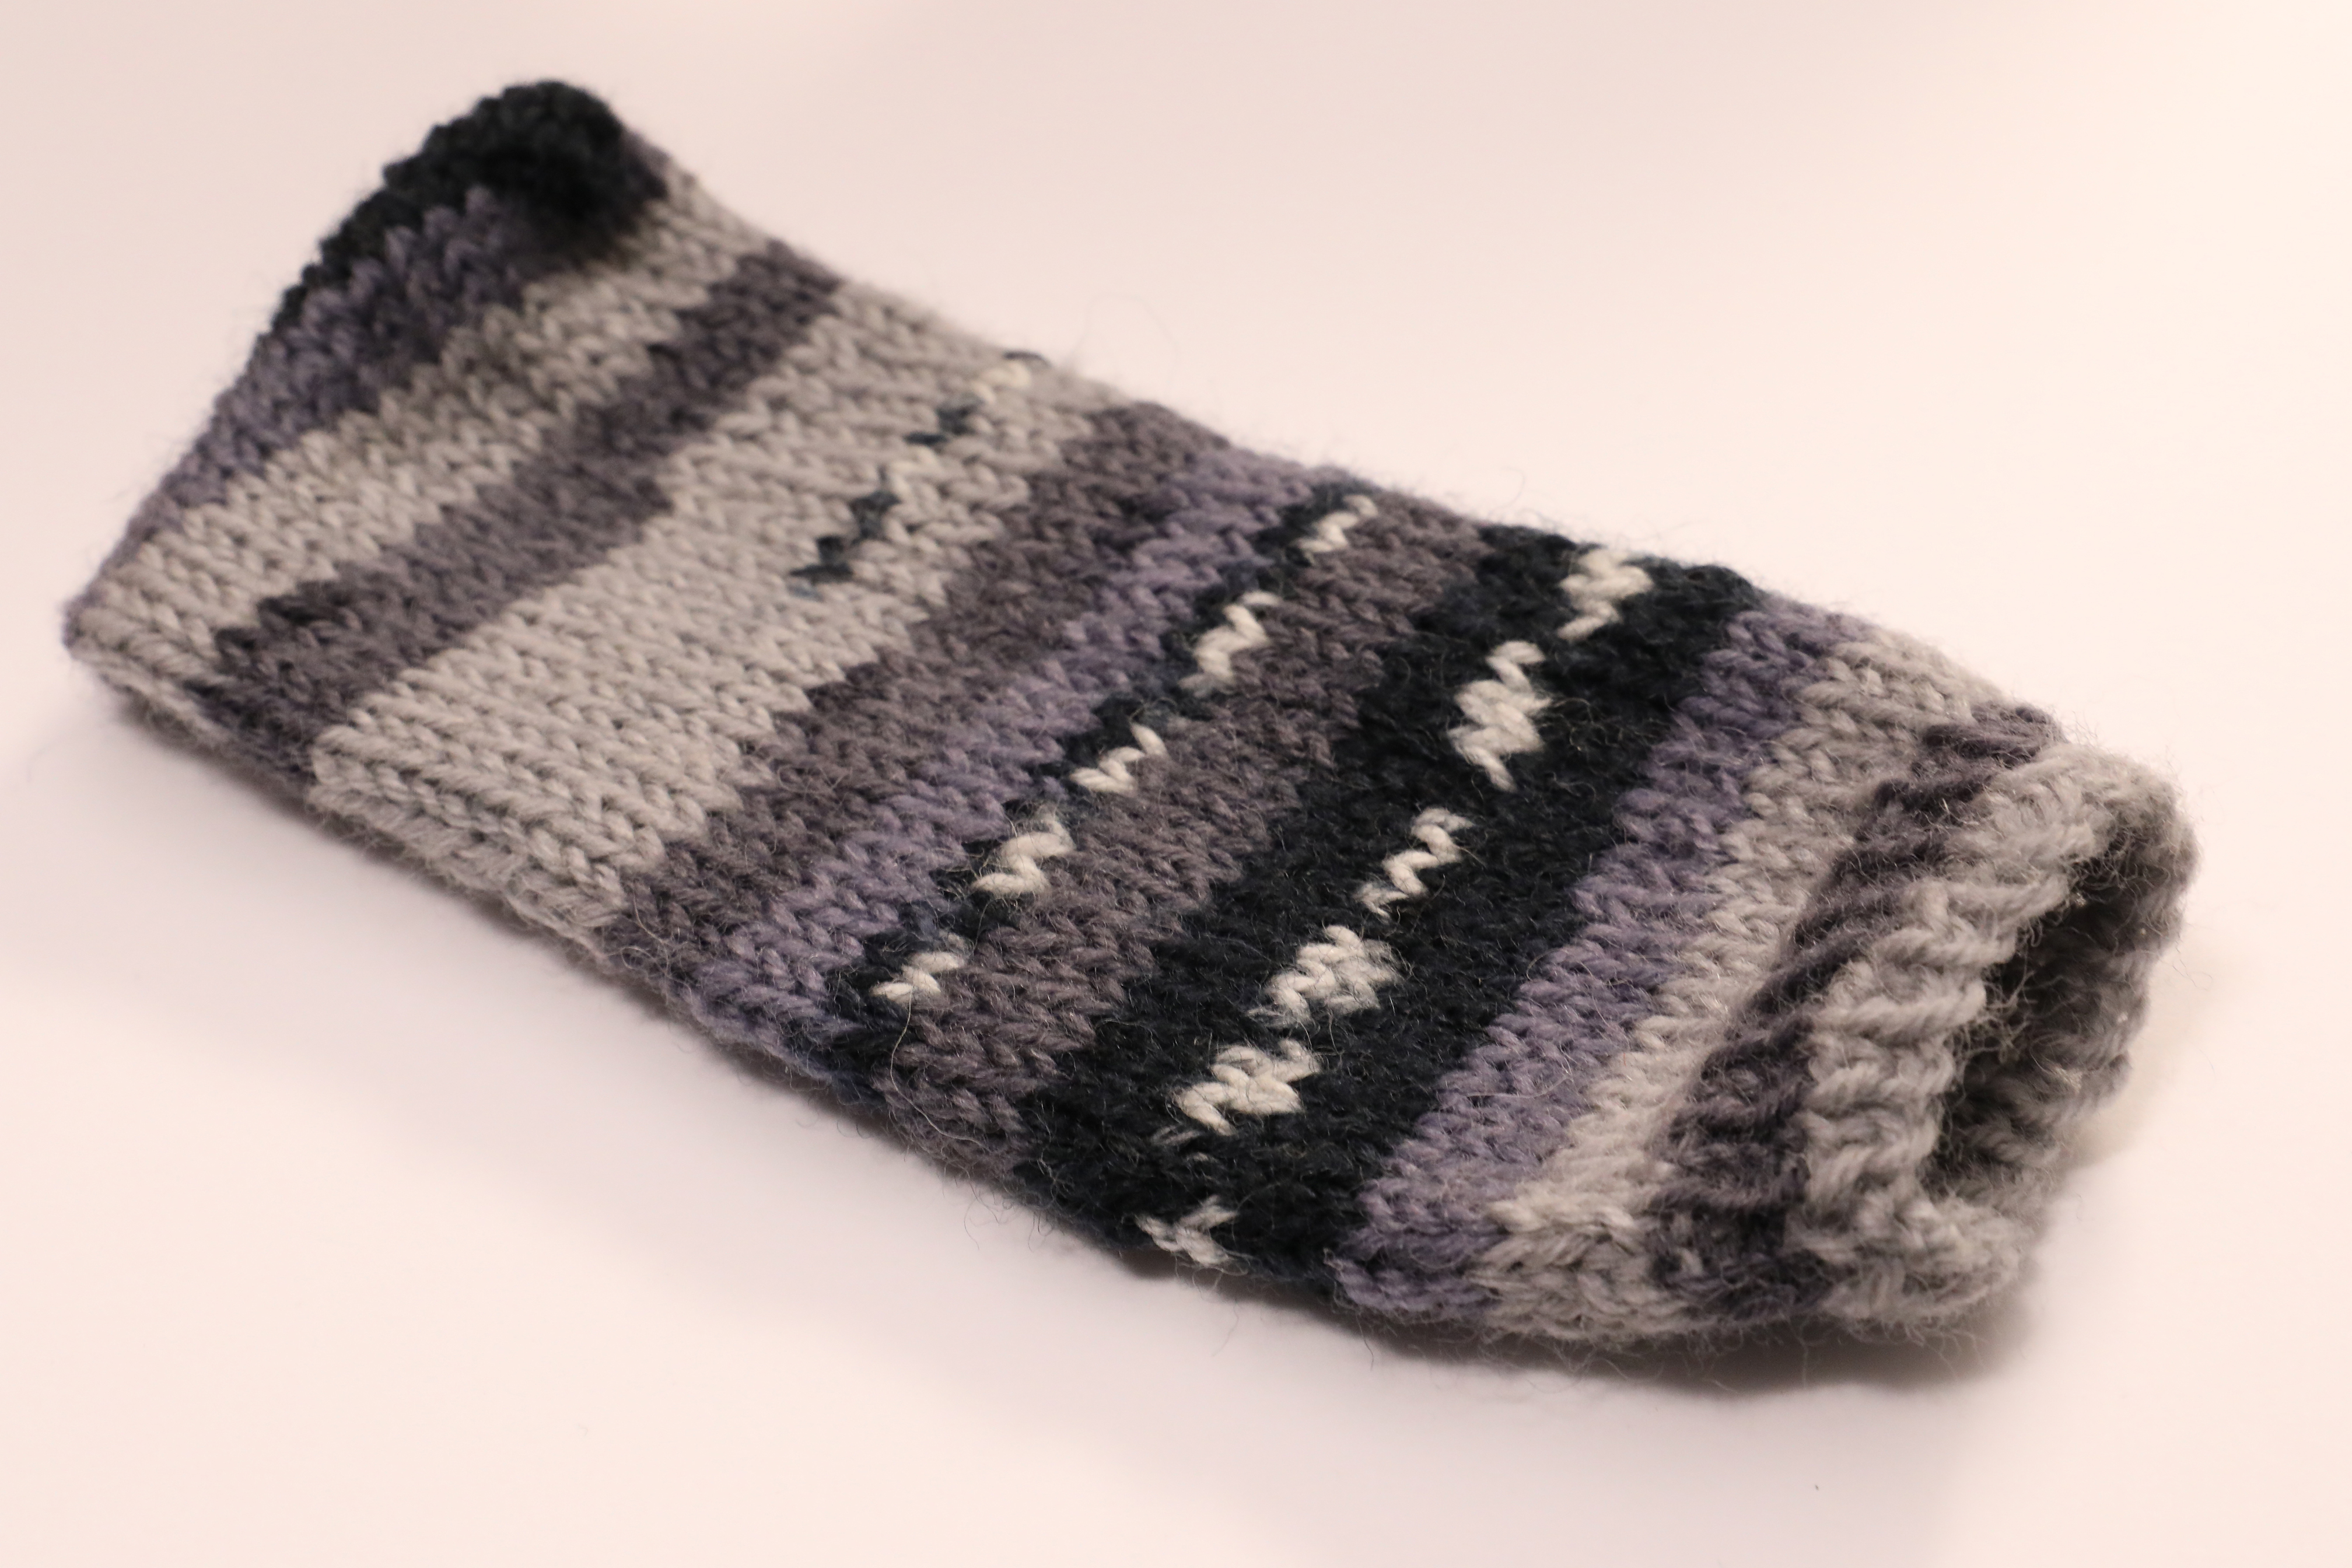 A knit, monochrome (black, white, and shades of grey) cellphone cozy on a white background. There is no cellphone present.